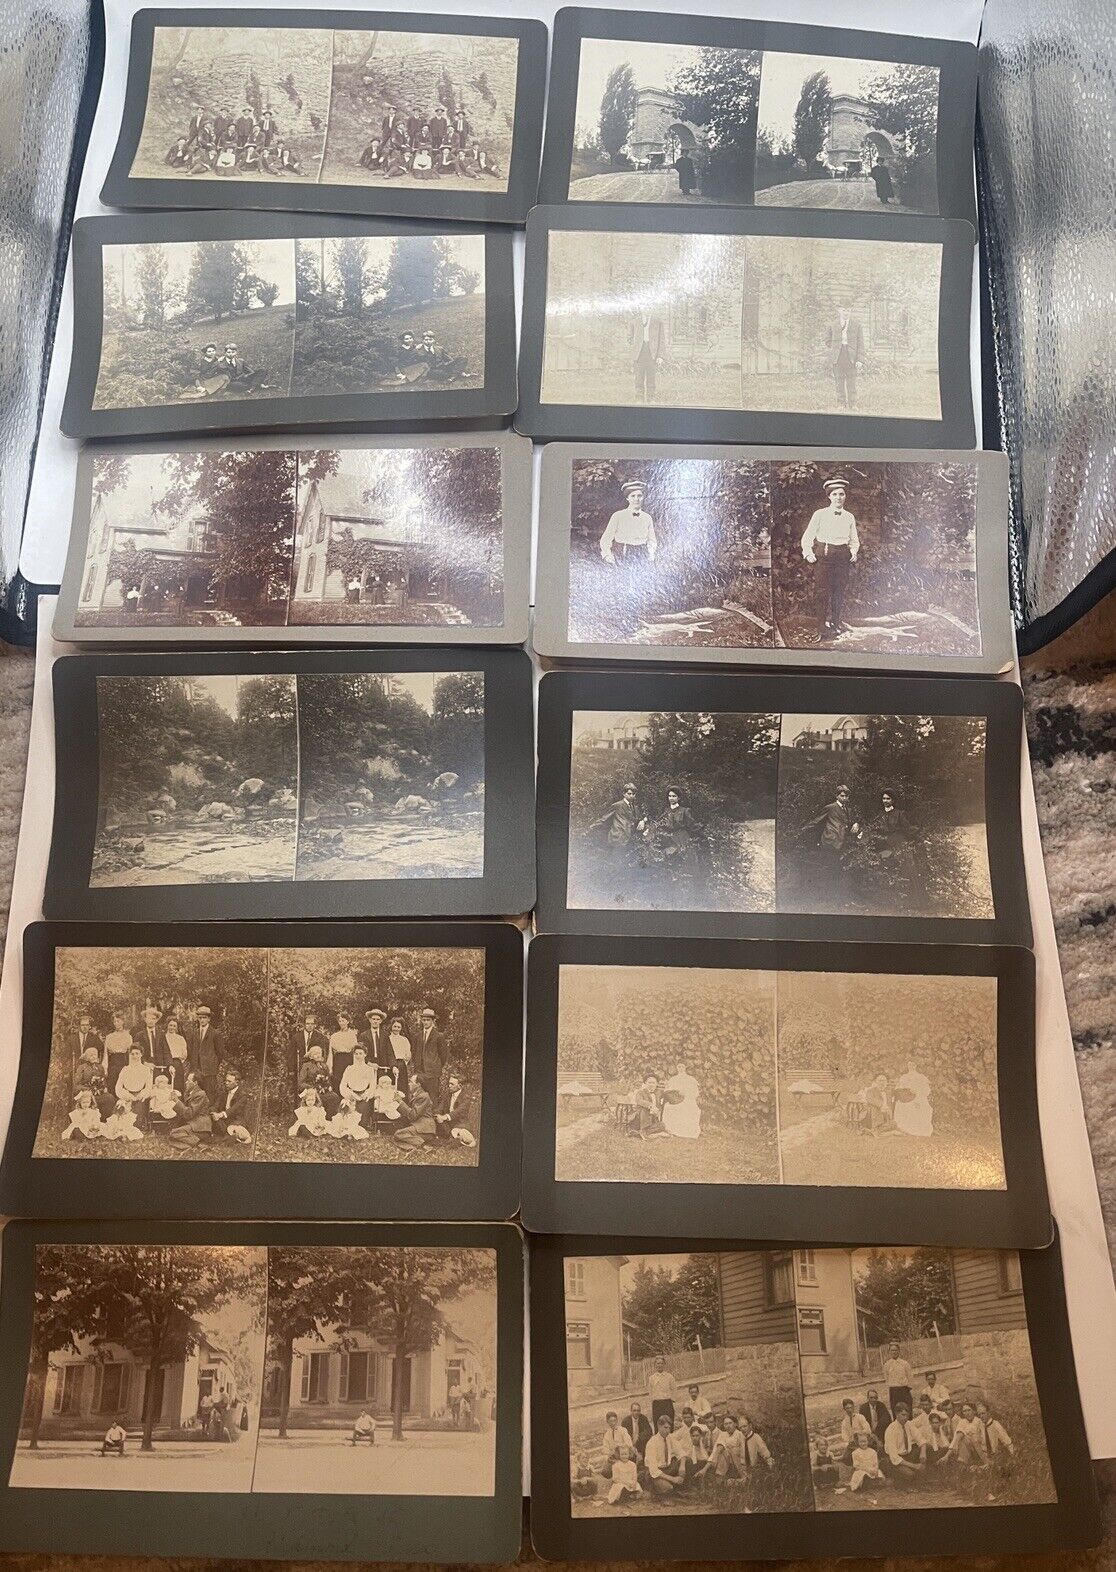 Huge Lot of 44 Stereoscope Stereoview Card Photos (late 1800's-early 1900's)